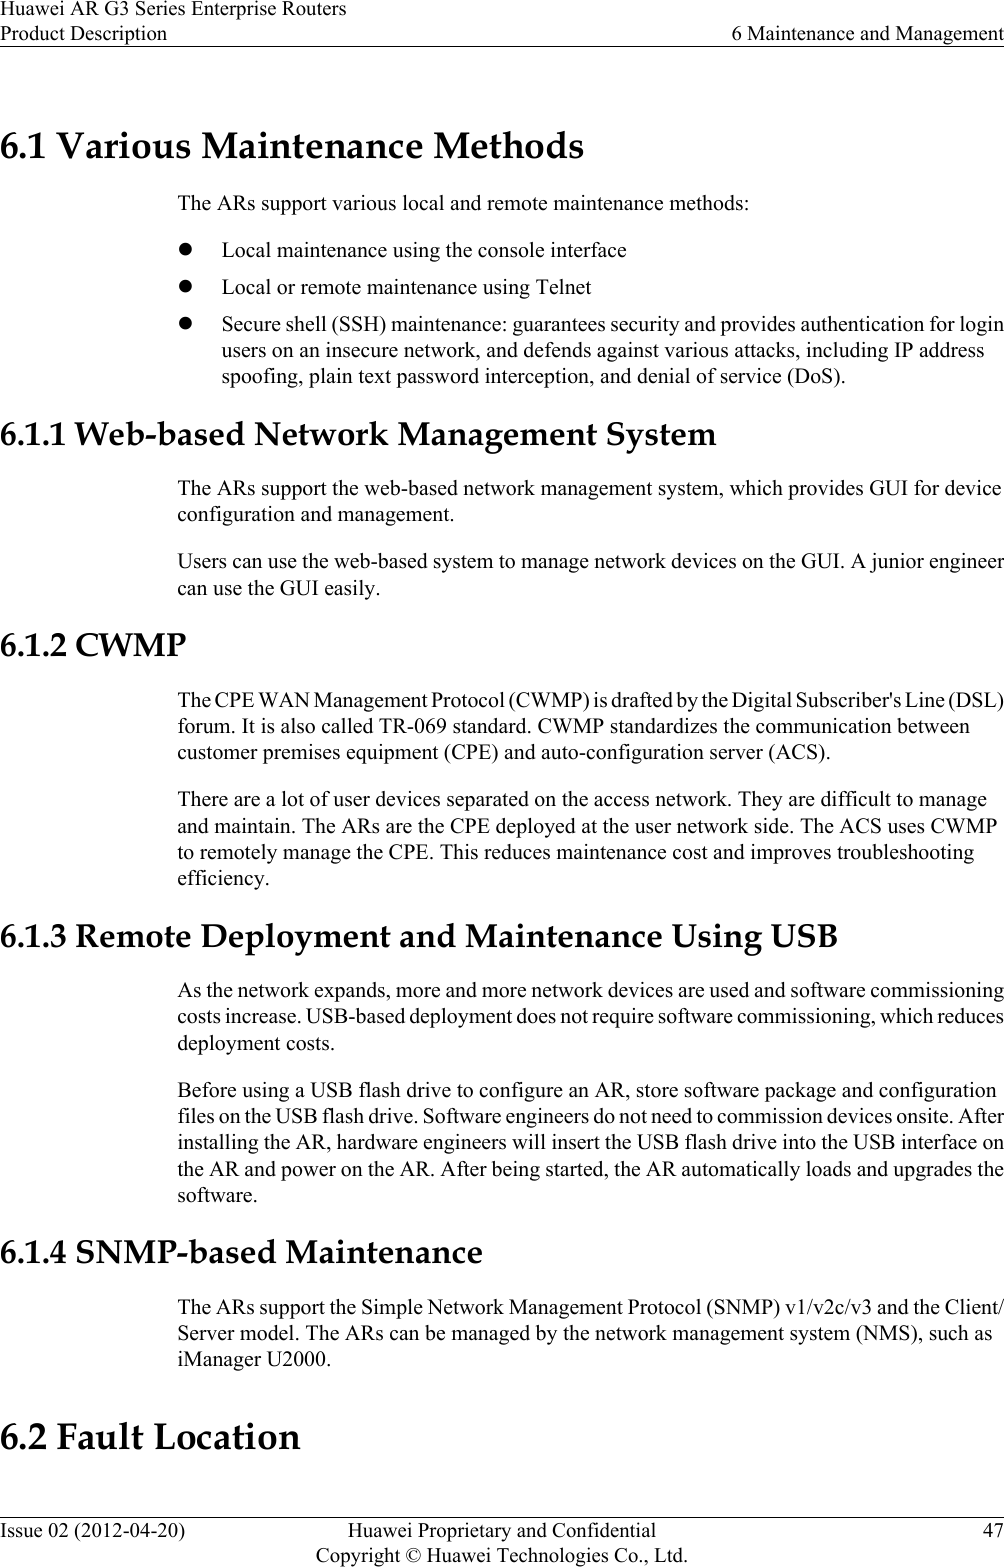 6.1 Various Maintenance MethodsThe ARs support various local and remote maintenance methods:lLocal maintenance using the console interfacelLocal or remote maintenance using TelnetlSecure shell (SSH) maintenance: guarantees security and provides authentication for loginusers on an insecure network, and defends against various attacks, including IP addressspoofing, plain text password interception, and denial of service (DoS).6.1.1 Web-based Network Management SystemThe ARs support the web-based network management system, which provides GUI for deviceconfiguration and management.Users can use the web-based system to manage network devices on the GUI. A junior engineercan use the GUI easily.6.1.2 CWMPThe CPE WAN Management Protocol (CWMP) is drafted by the Digital Subscriber&apos;s Line (DSL)forum. It is also called TR-069 standard. CWMP standardizes the communication betweencustomer premises equipment (CPE) and auto-configuration server (ACS).There are a lot of user devices separated on the access network. They are difficult to manageand maintain. The ARs are the CPE deployed at the user network side. The ACS uses CWMPto remotely manage the CPE. This reduces maintenance cost and improves troubleshootingefficiency.6.1.3 Remote Deployment and Maintenance Using USBAs the network expands, more and more network devices are used and software commissioningcosts increase. USB-based deployment does not require software commissioning, which reducesdeployment costs.Before using a USB flash drive to configure an AR, store software package and configurationfiles on the USB flash drive. Software engineers do not need to commission devices onsite. Afterinstalling the AR, hardware engineers will insert the USB flash drive into the USB interface onthe AR and power on the AR. After being started, the AR automatically loads and upgrades thesoftware.6.1.4 SNMP-based MaintenanceThe ARs support the Simple Network Management Protocol (SNMP) v1/v2c/v3 and the Client/Server model. The ARs can be managed by the network management system (NMS), such asiManager U2000.6.2 Fault LocationHuawei AR G3 Series Enterprise RoutersProduct Description 6 Maintenance and ManagementIssue 02 (2012-04-20) Huawei Proprietary and ConfidentialCopyright © Huawei Technologies Co., Ltd.47